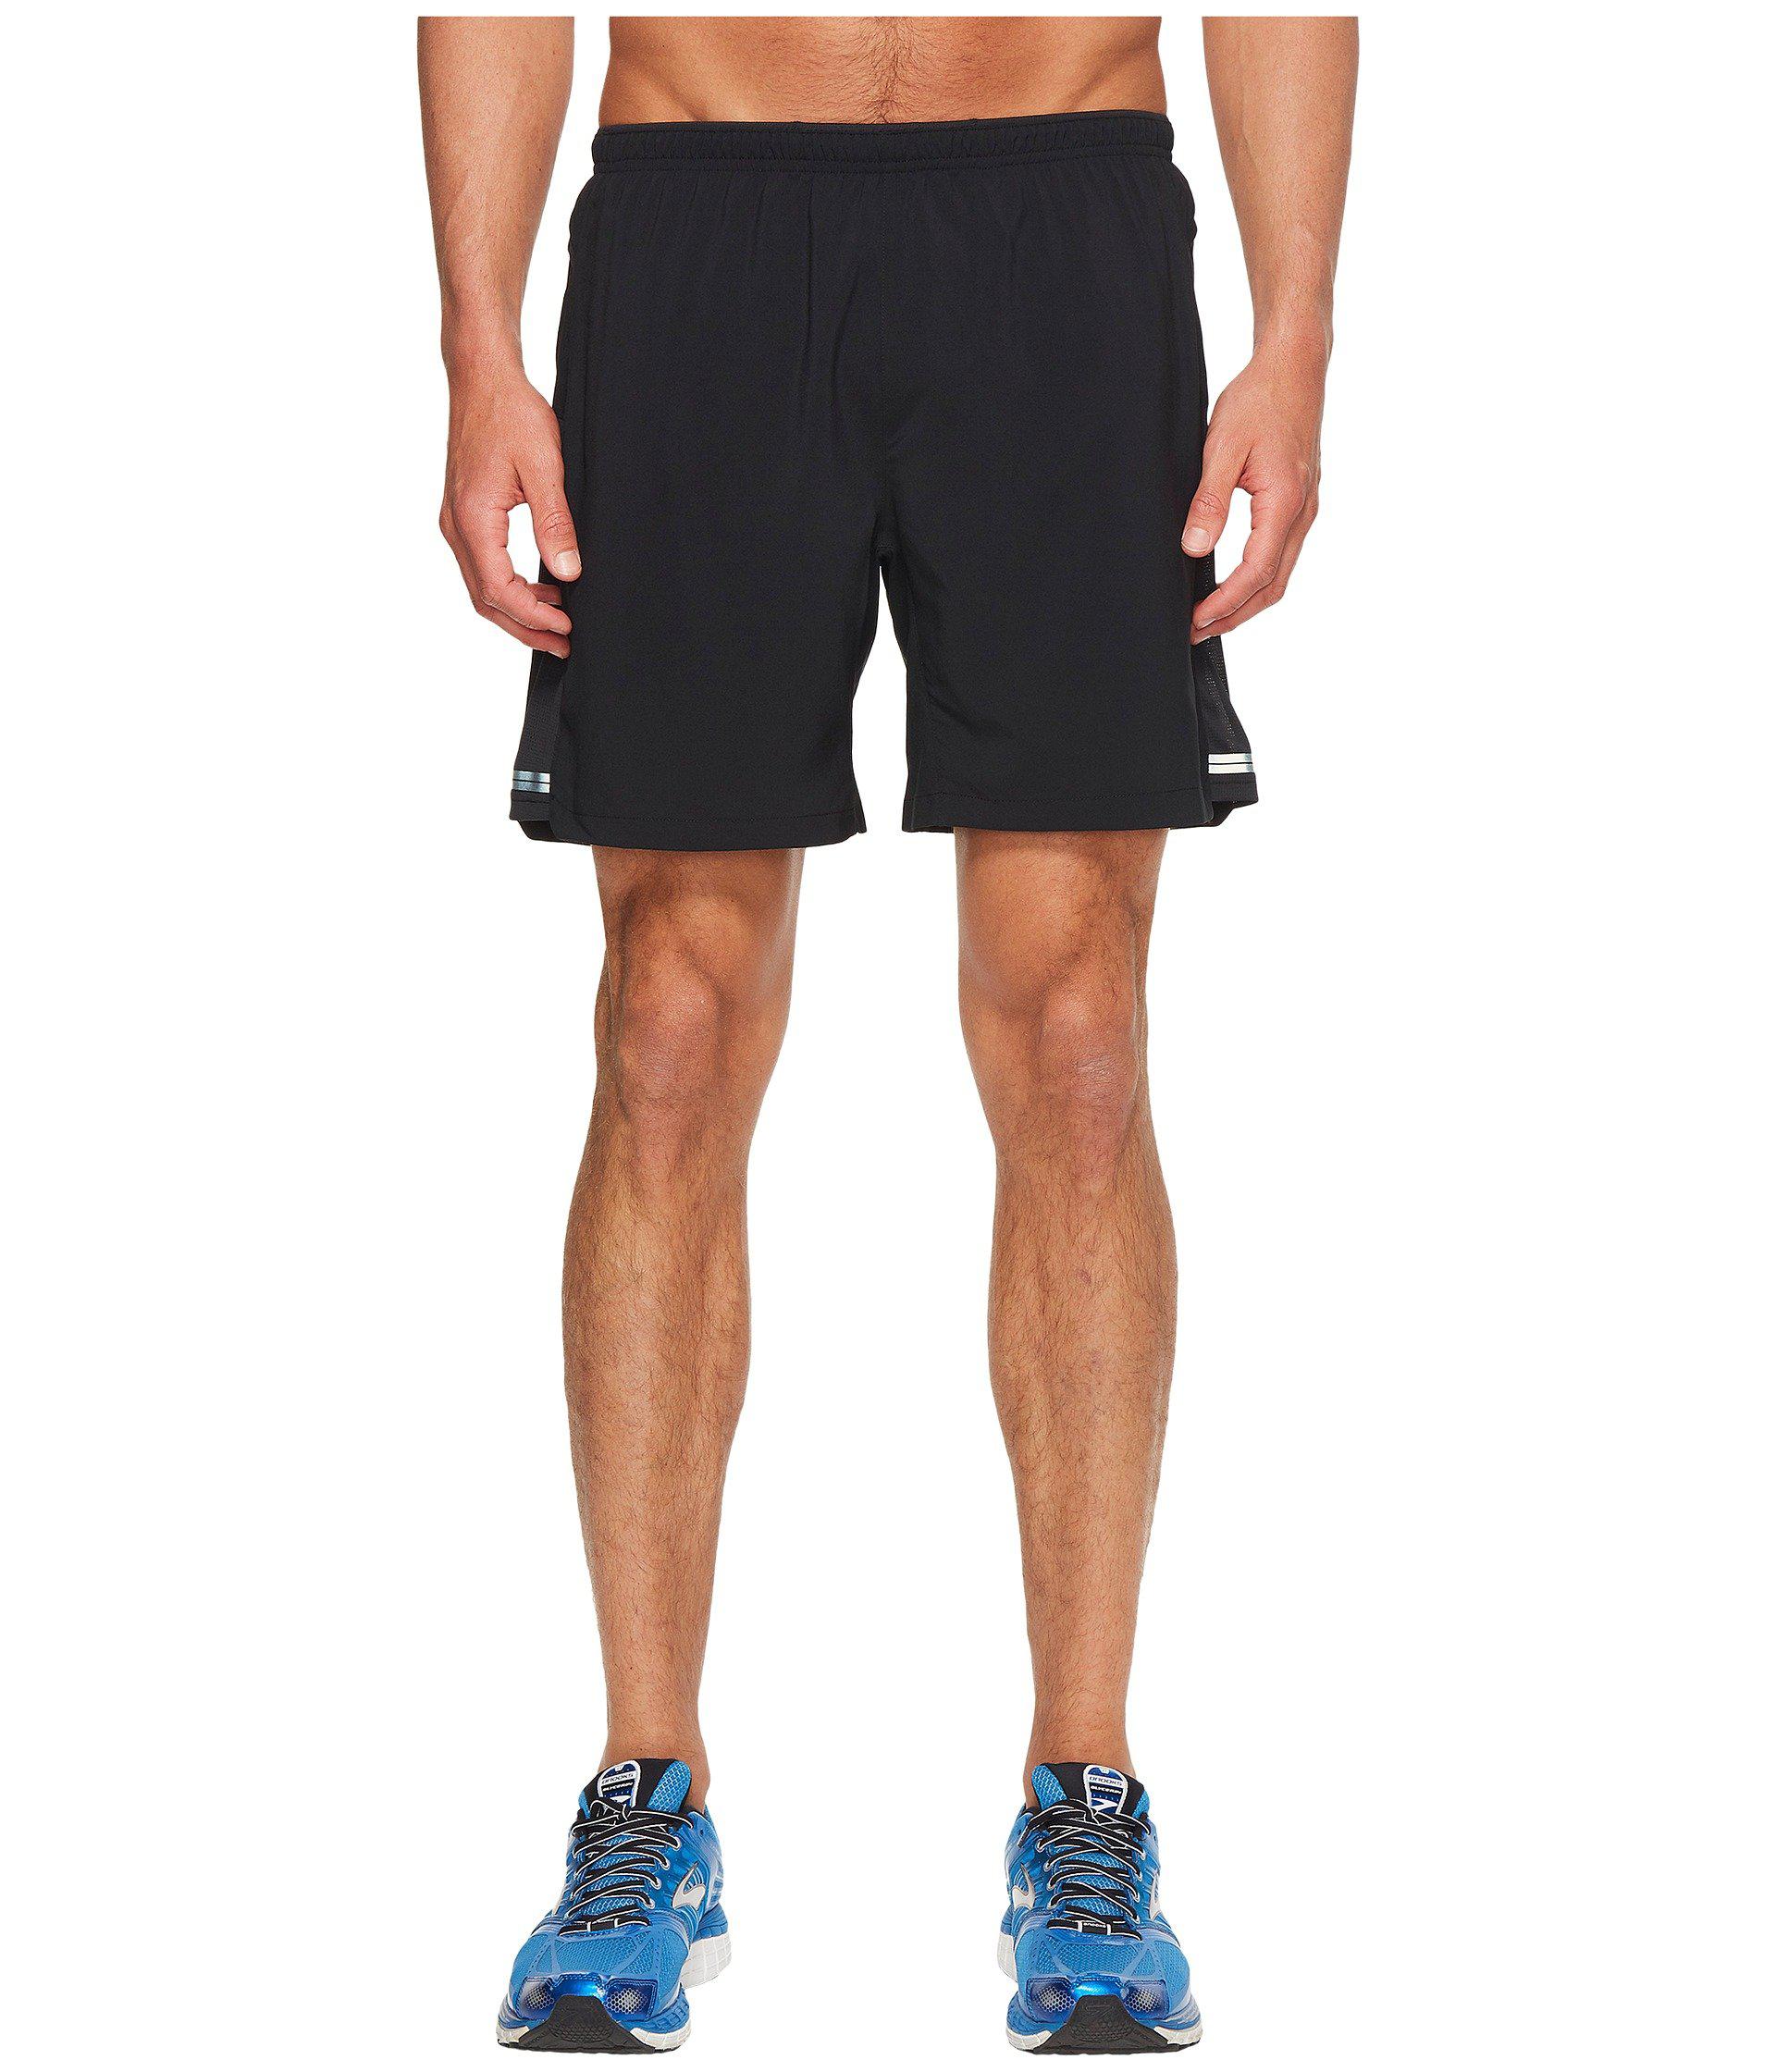 Brooks Synthetic Sherpa 7 2-in-1 Shorts in Black for Men - Lyst